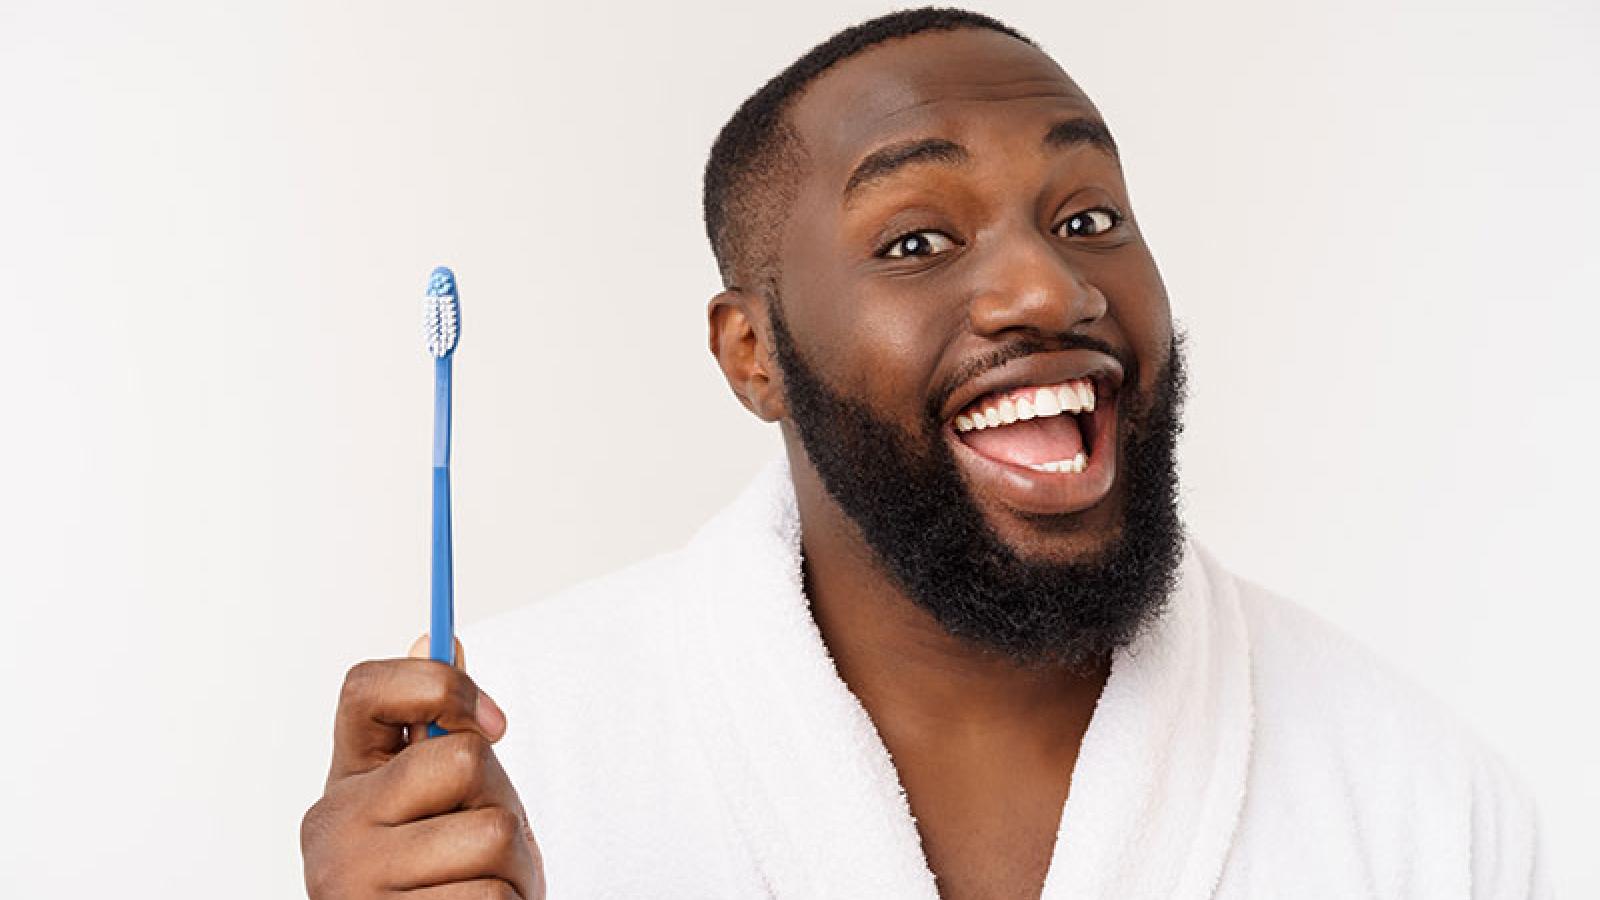 Is Brushing Your Teeth Good for Your Heart?